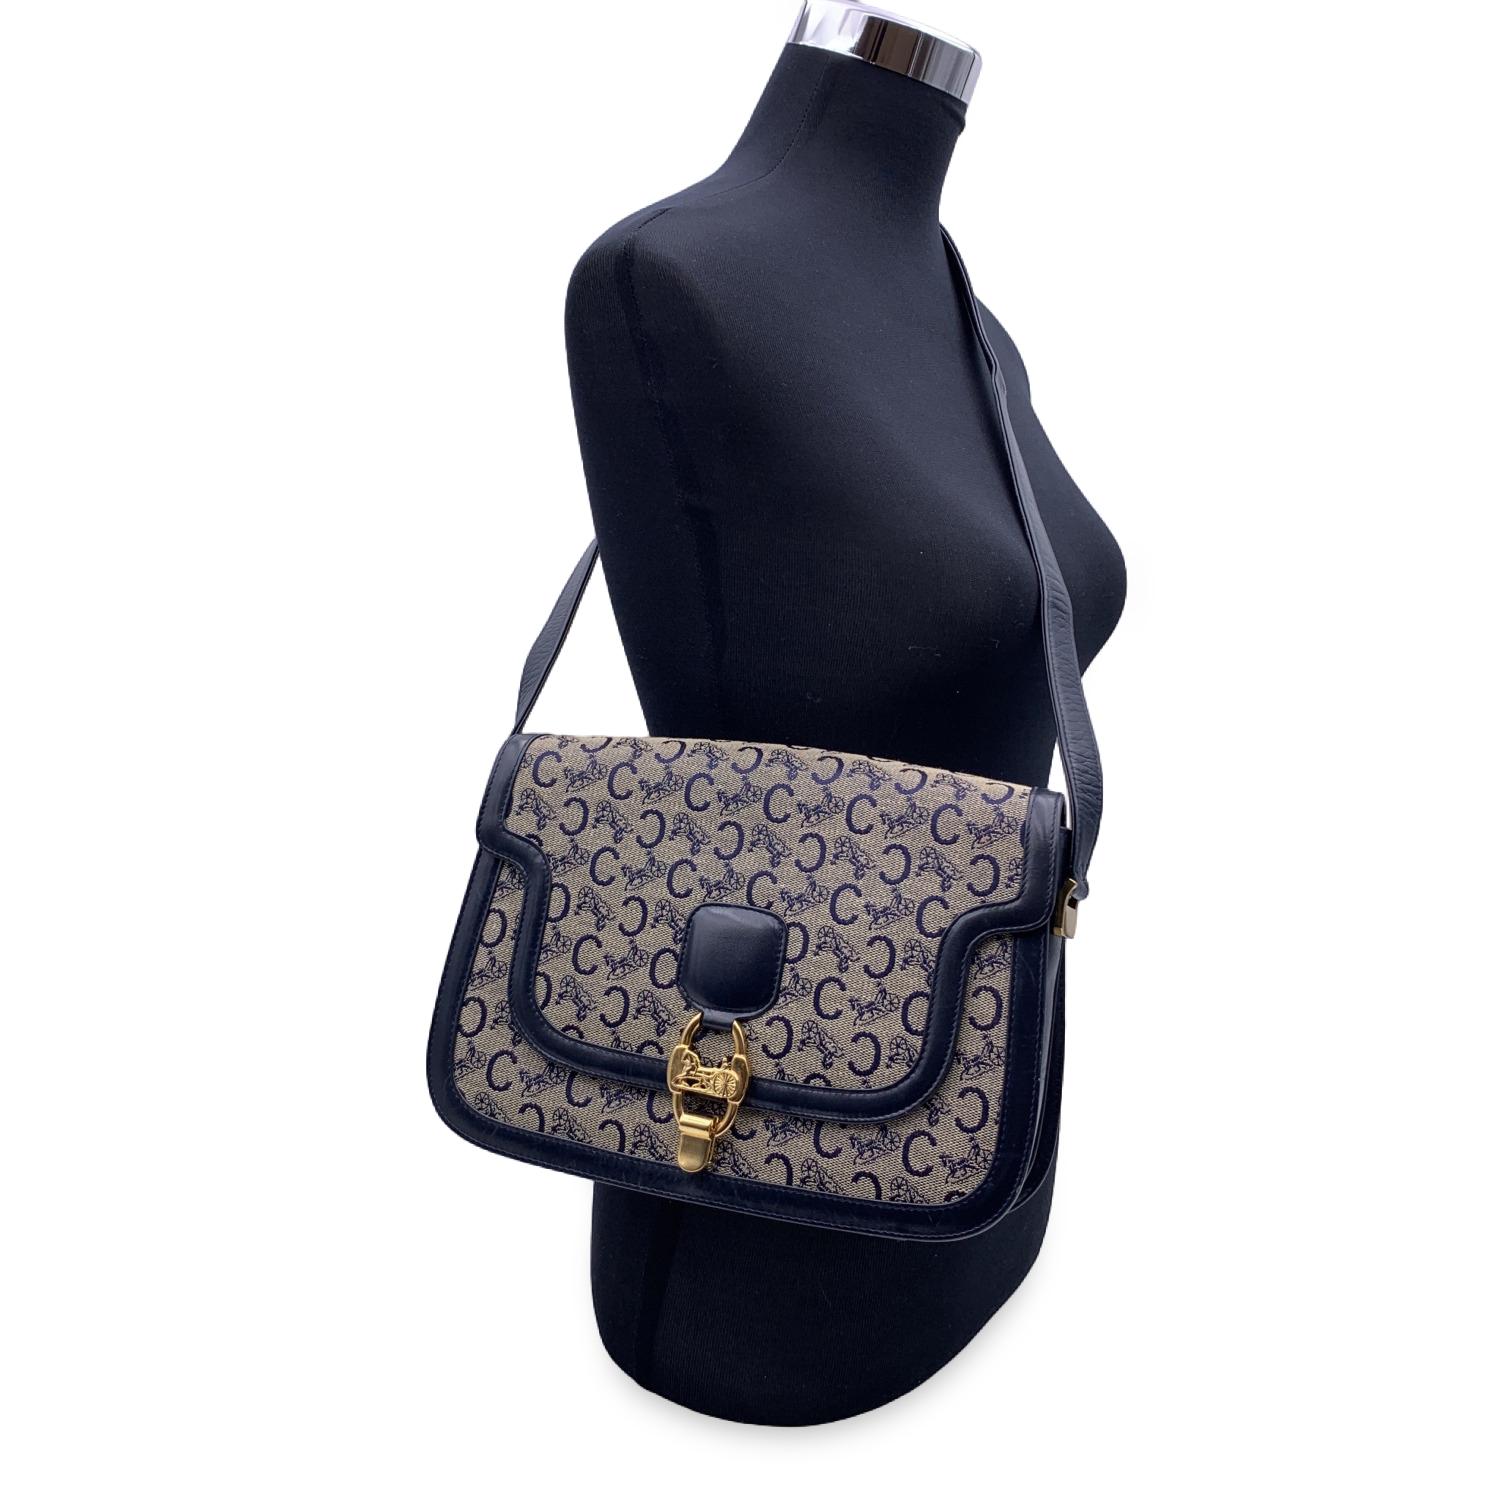 Celine 'Macadam C' box shoulder bag in Macadam C canvas with navy blue leather trim and shoulder strap. Gold metal hardware. Flap with front Caleche clasp closure. Adjustable shoulder strap. Blue leather lining. 3 side open pockets and 1 side zip